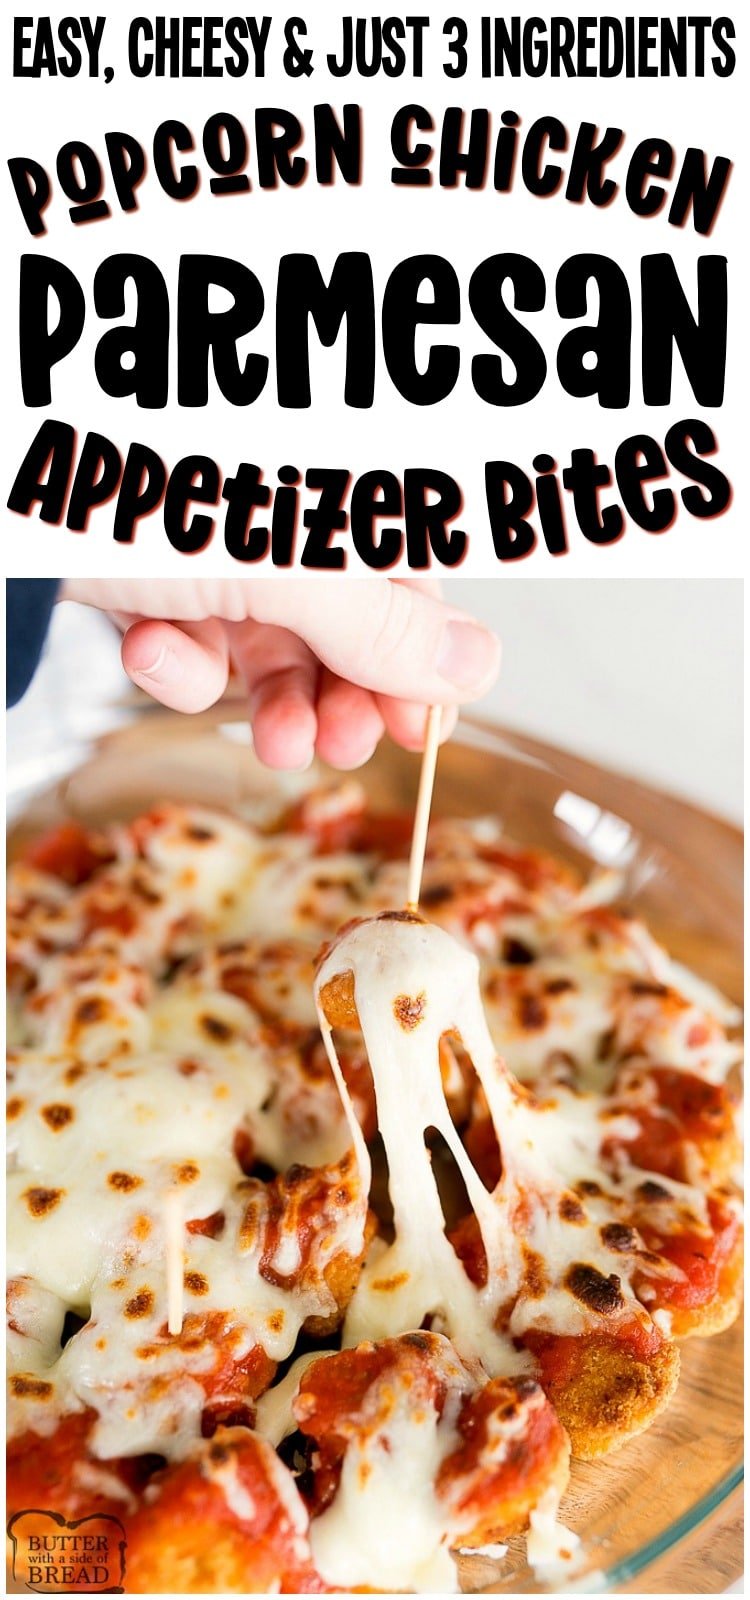 Chicken Parmesan Bites are a delicious appetizer perfect for the big game! With popcorn chicken, a little marinara sauce and mozzarella cheese, this pop-able appetizer couldn't be easier!